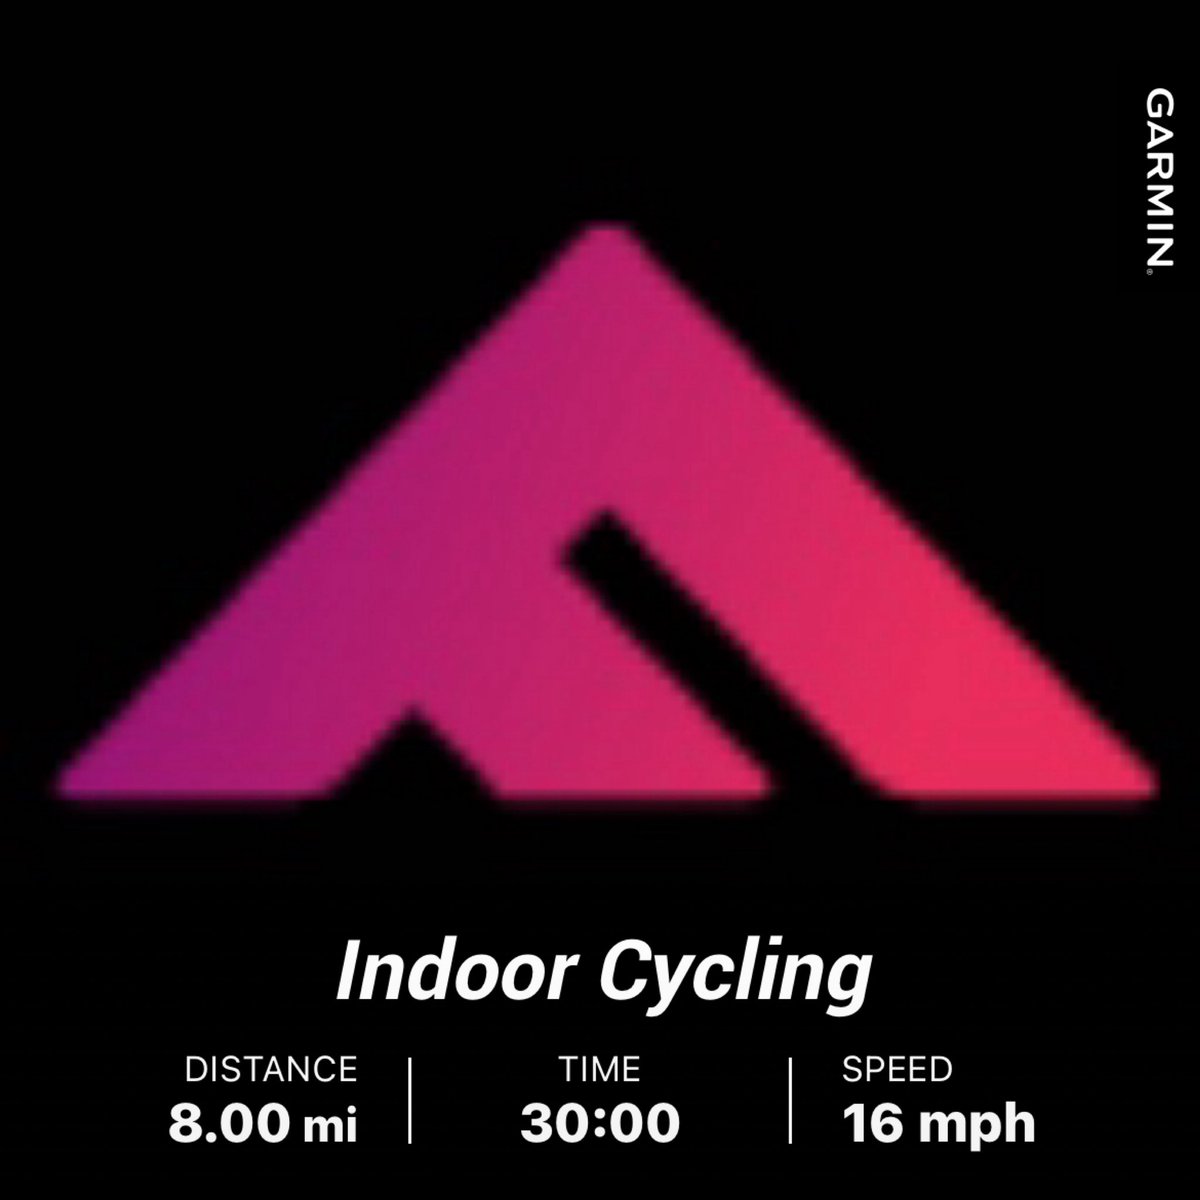 Back on the bike that goes no where slow and steady 🐢🐰30 minutes 🚴‍♀️10 minutes 🙆🏻‍♀️ #justmove #LetsGetFitAESD #FitLeaders #4AMcrew @PrincipalRoRod @zjgalvan @Asael_Ruvalcaba @DrRenaeBryant @ValChavez2018 @fit_leader @DiocelinaBelle @LorenaRubio123